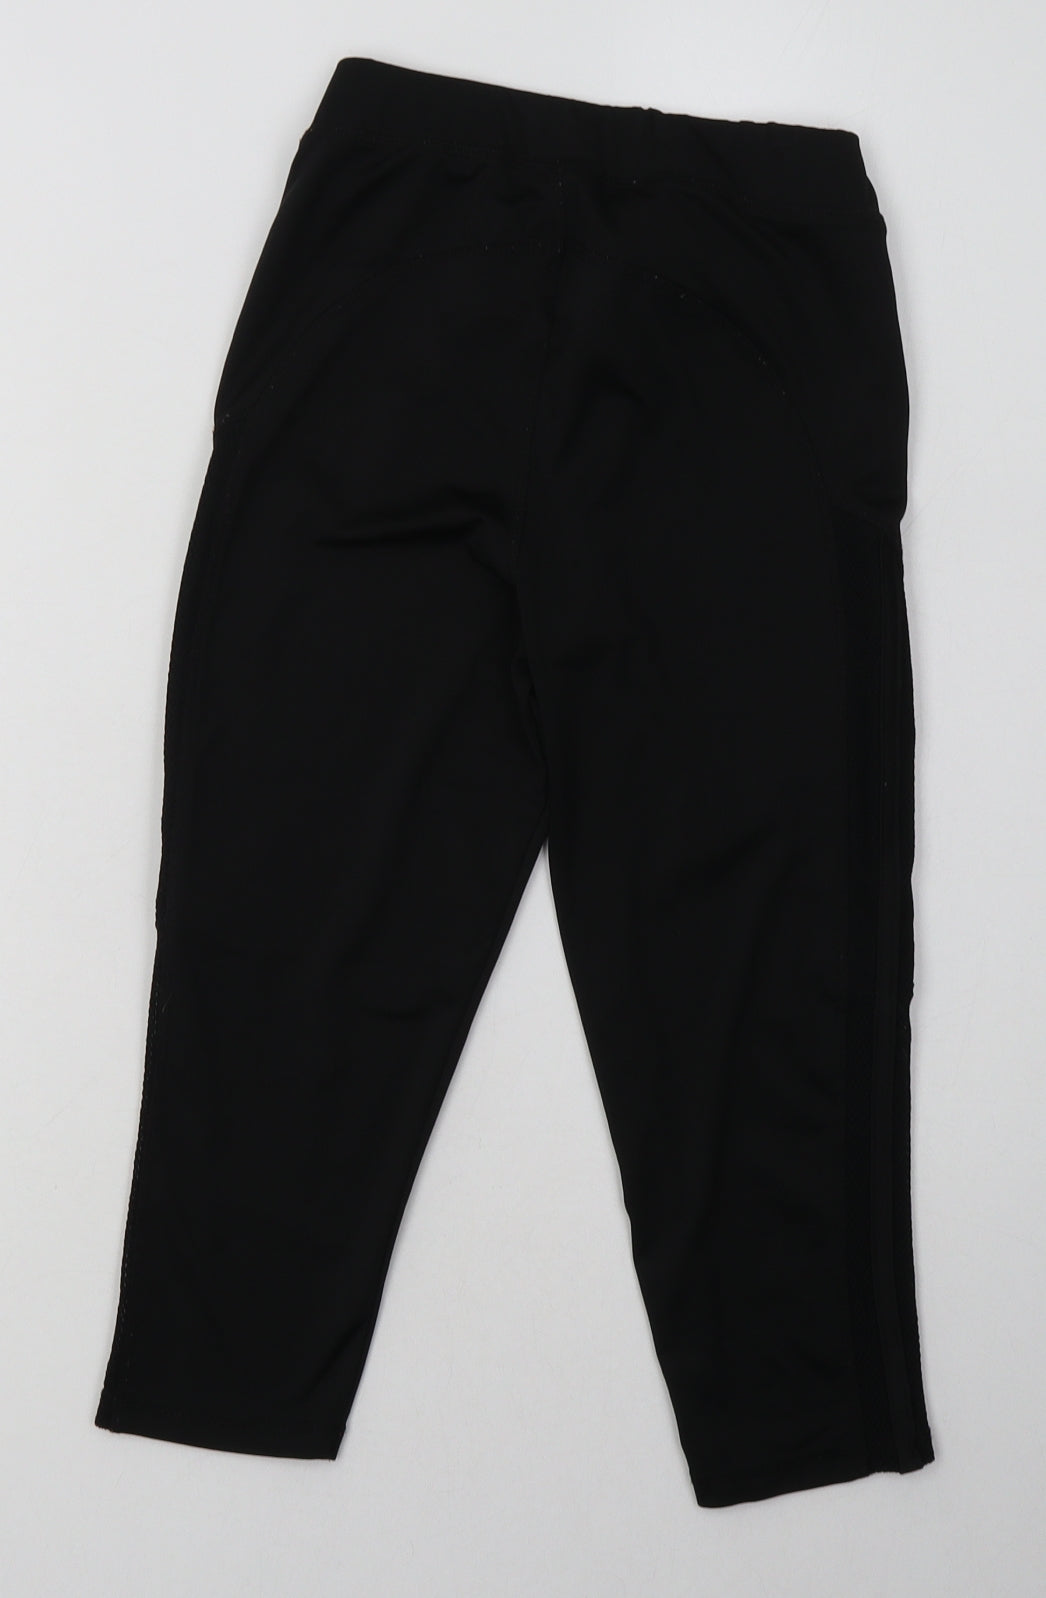 miss evie Girls Black  Polyester Cropped Trousers Size 12 Years  Regular